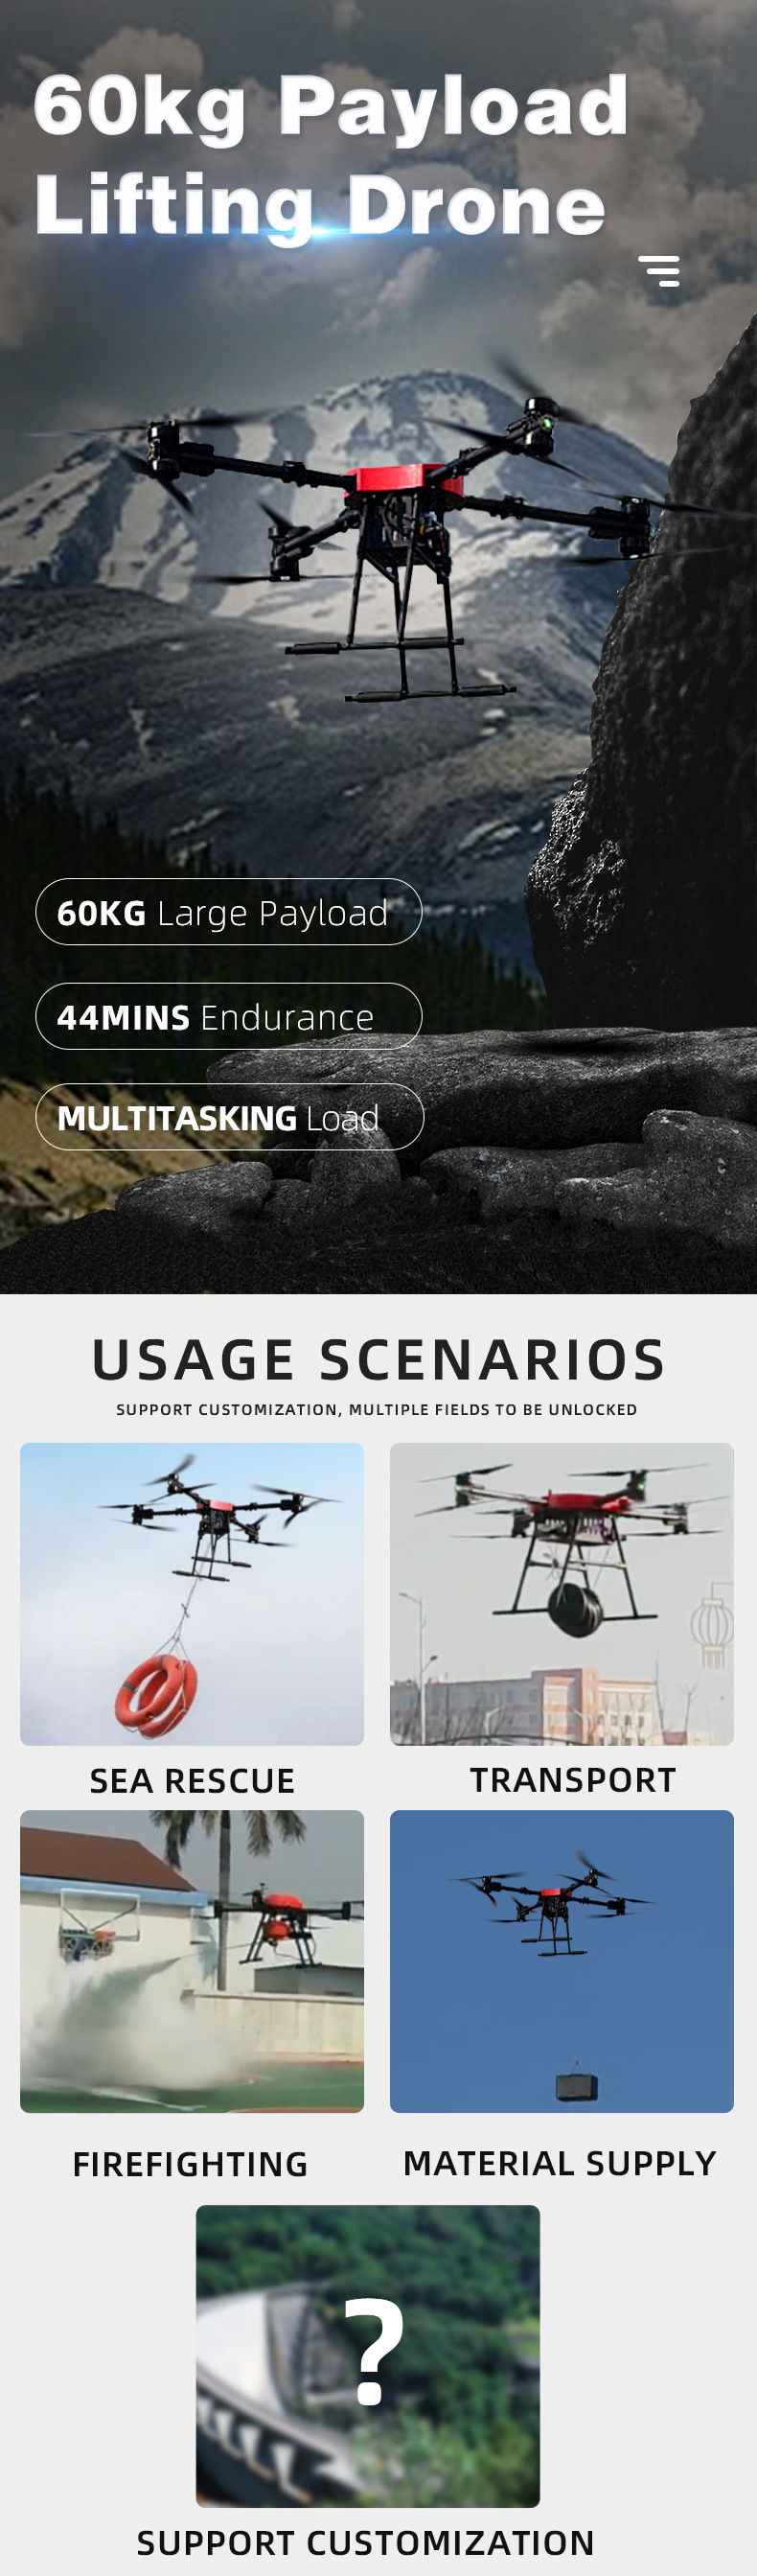 Automatic Targeting and Return Route Planning Portable 60kg Payload Delivery Drone